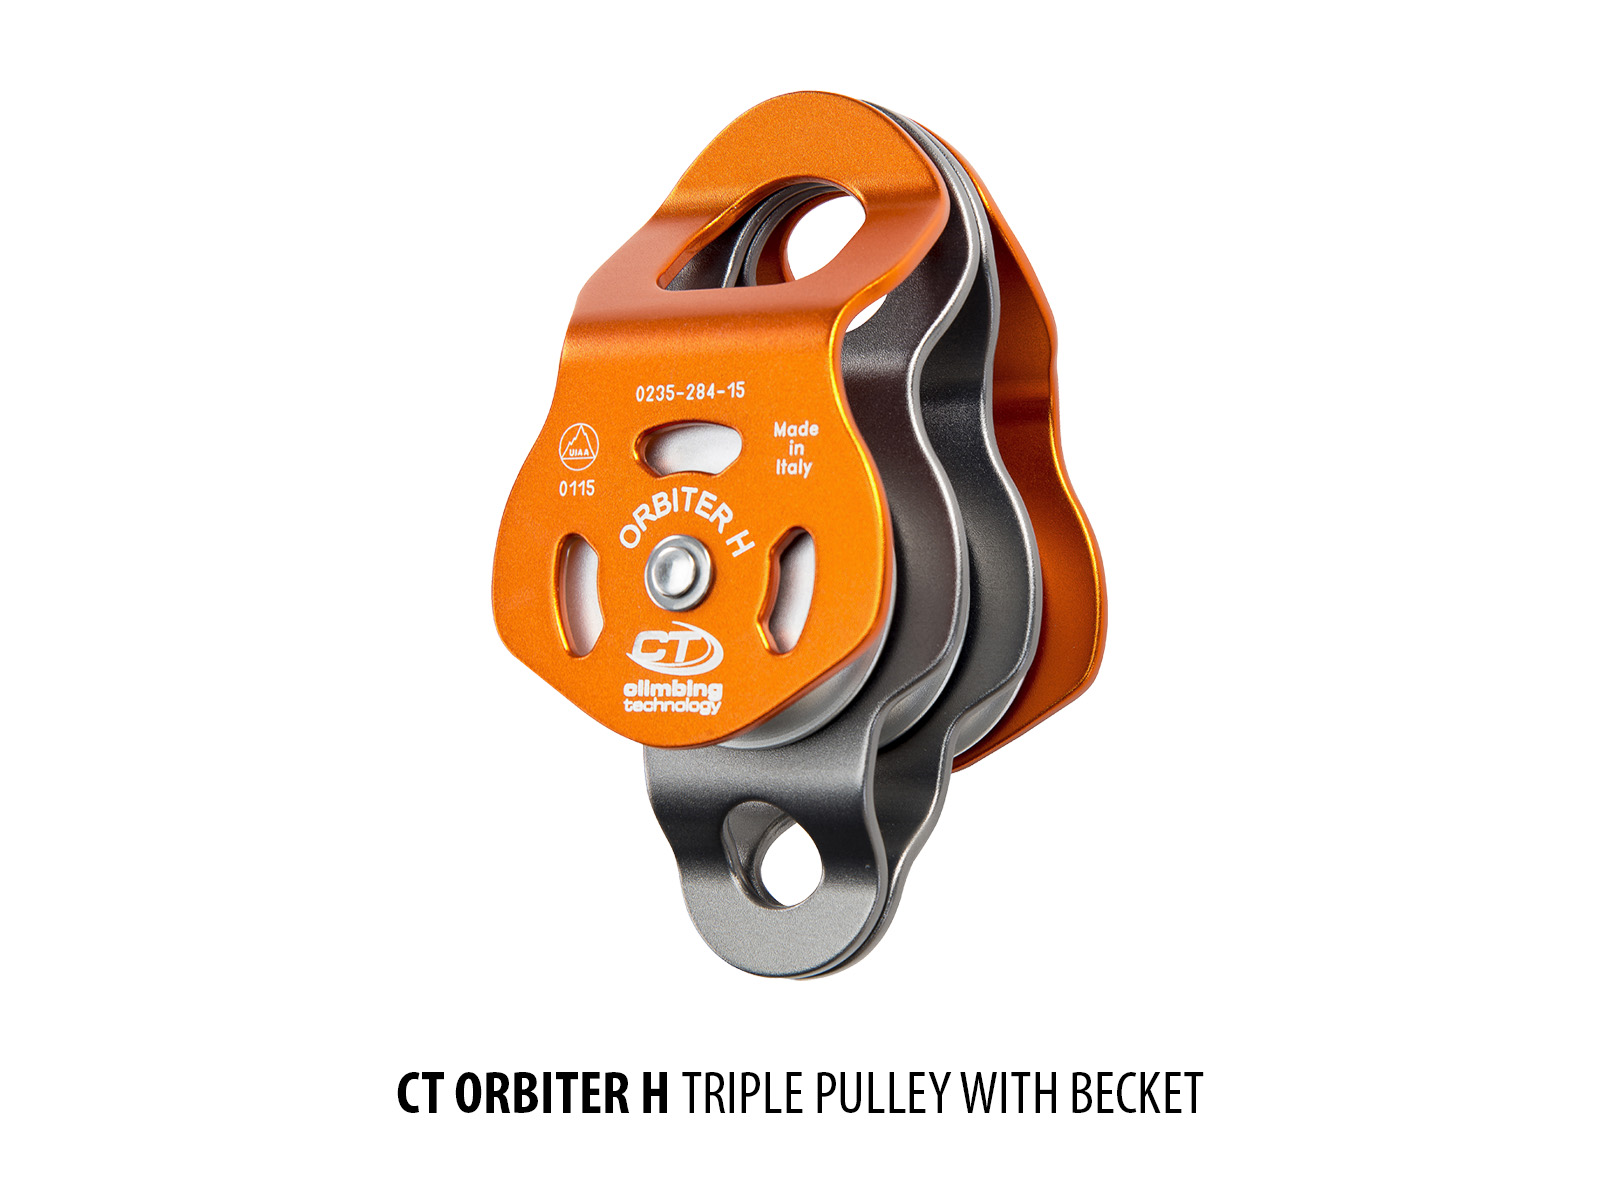 CT Orbiter H Triple Pulley with Becket